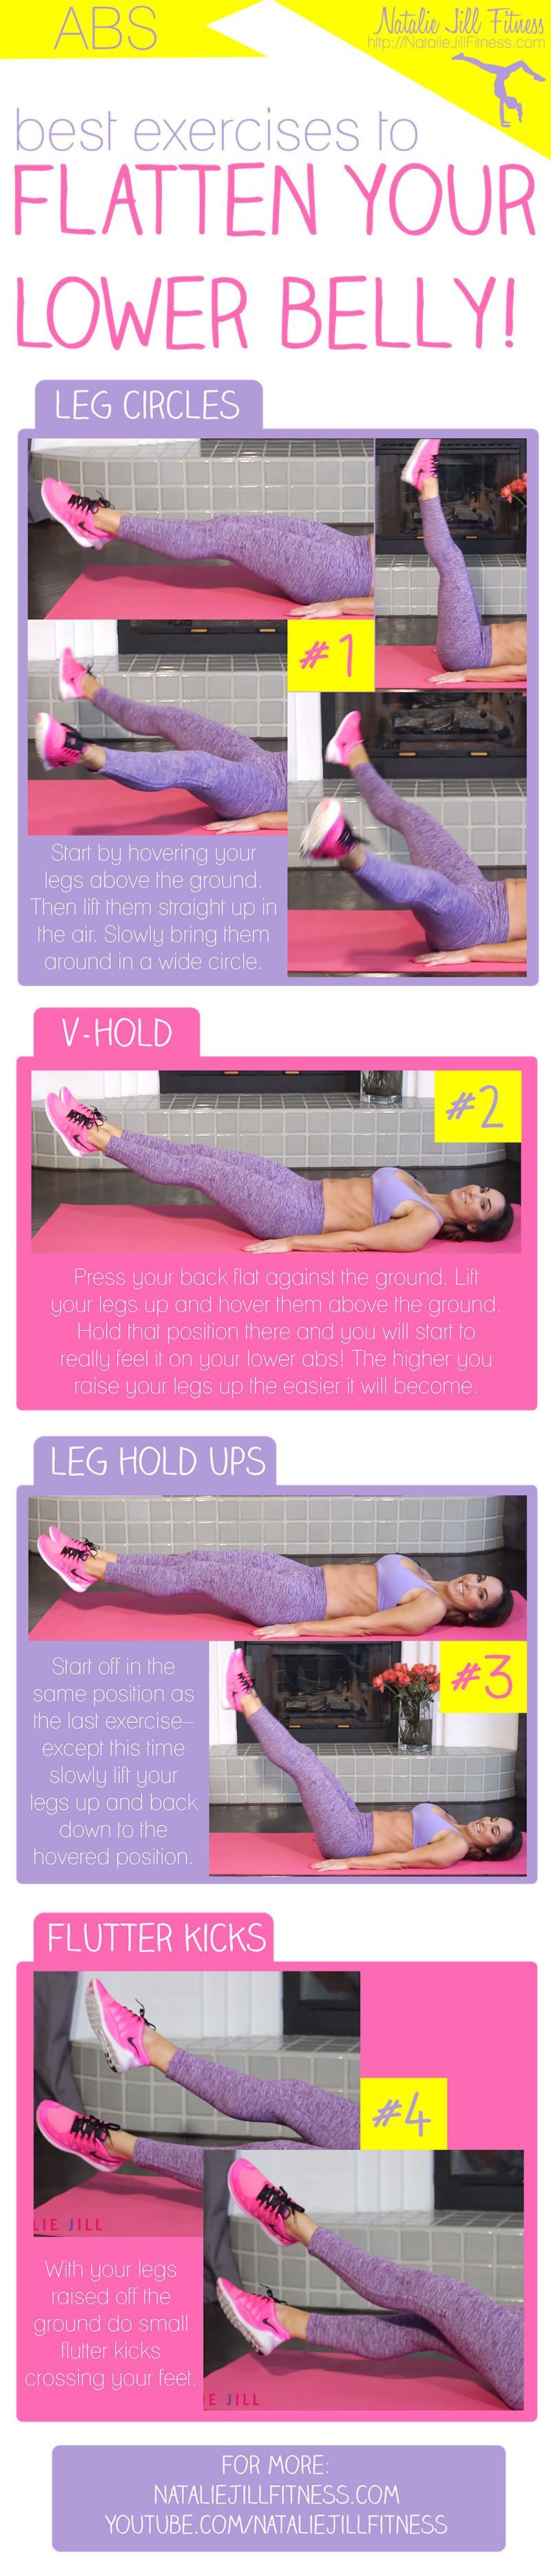 Belly Pooch Be GONE!!!! Here Are The BEST Exercises To Flatten Your Lower Belly!!! Click On The Link Below For The FULL Video.